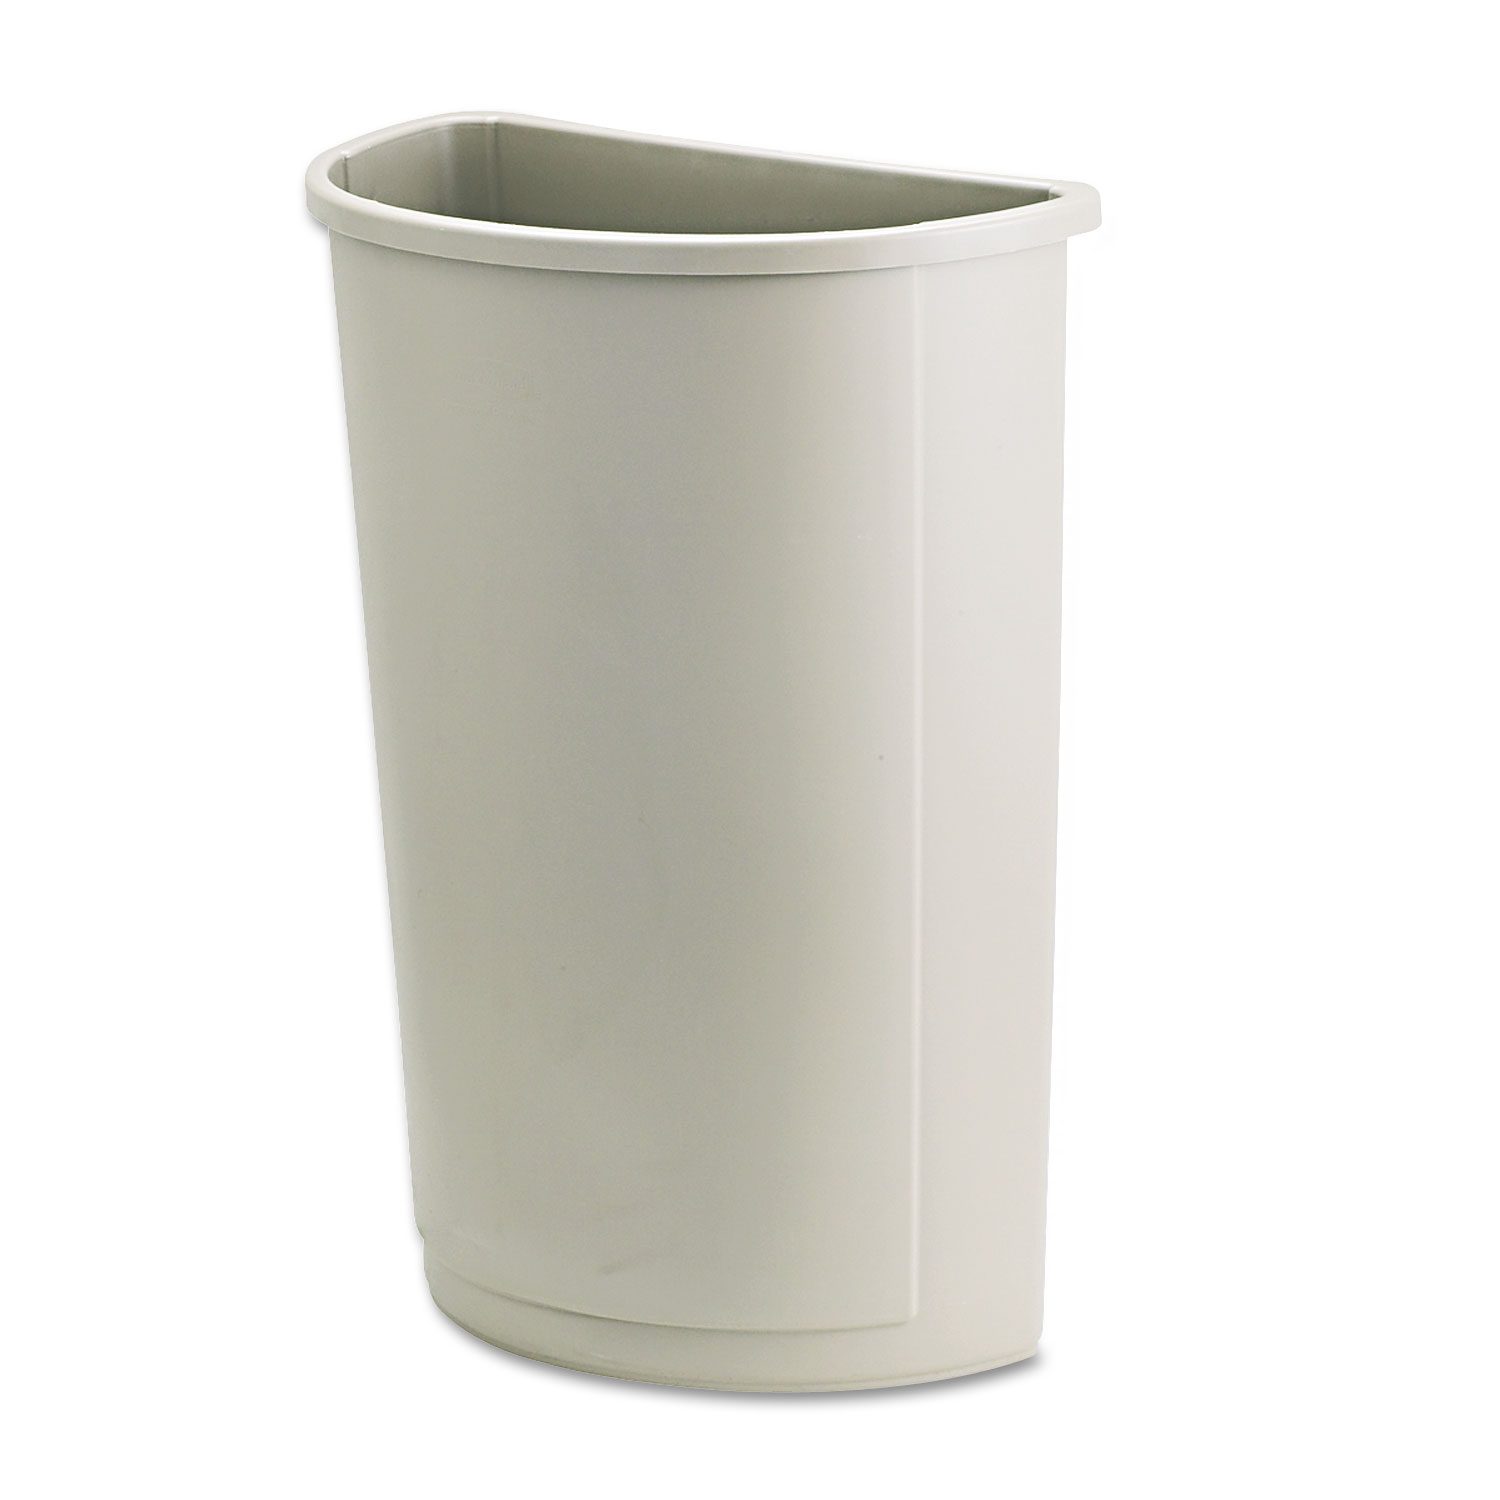 Rubbermaid RCP352000BG Commercial Untouchable Waste Container, Half-Round, Plastic, 21gal, Beige